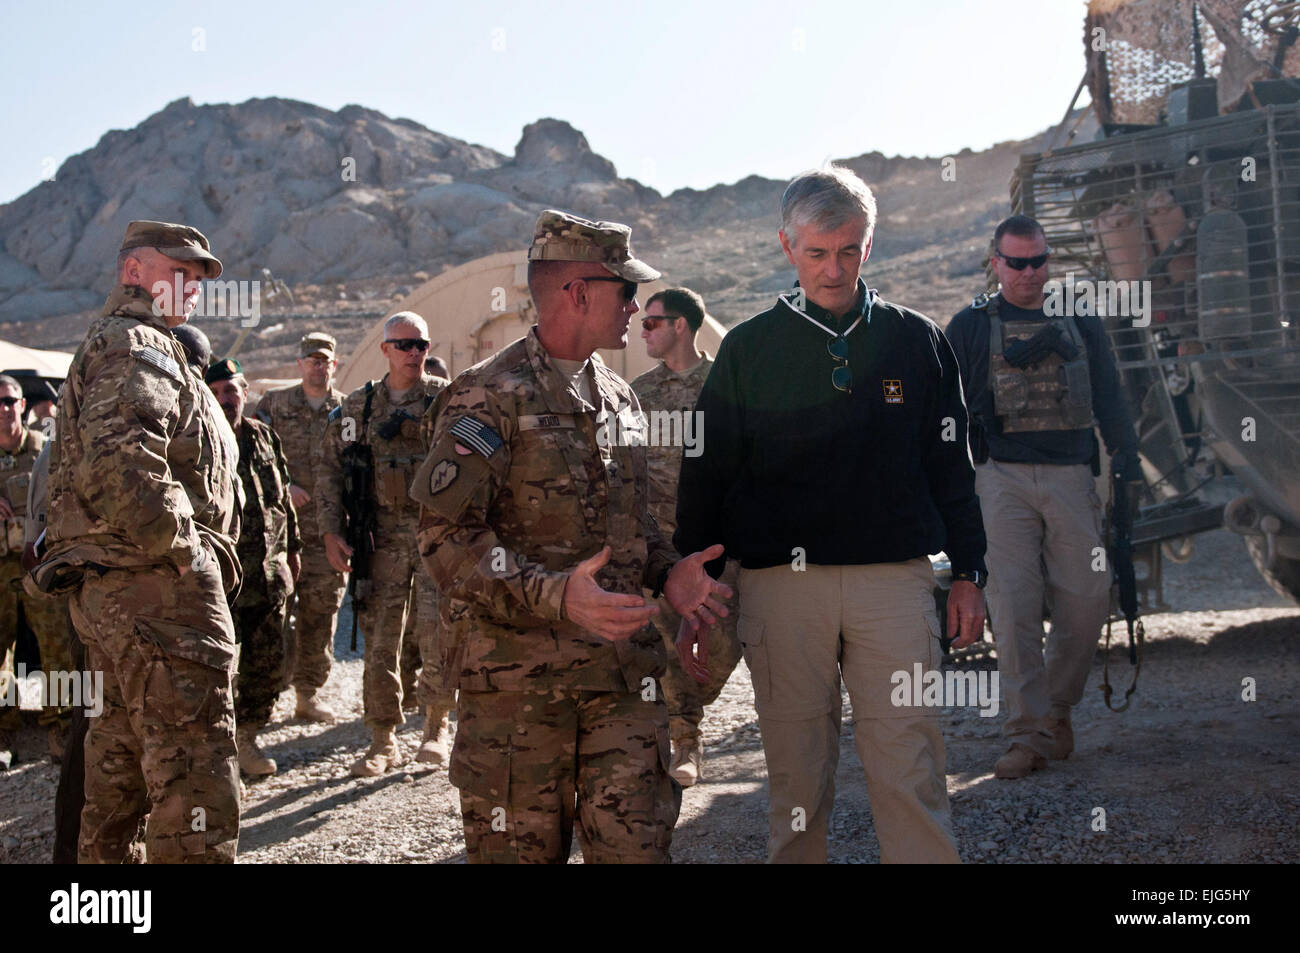 Secretary of the Army John McHugh talks with Col. Todd R. Wood, commander of 1st Stryker Brigade Combat Team, 25th Infantry Division, during a visit to Forward Operating Base Masum Ghar in Kandahar Province, Afghanistan, Dec. 14.  Spc. John G. Martinez Stock Photo